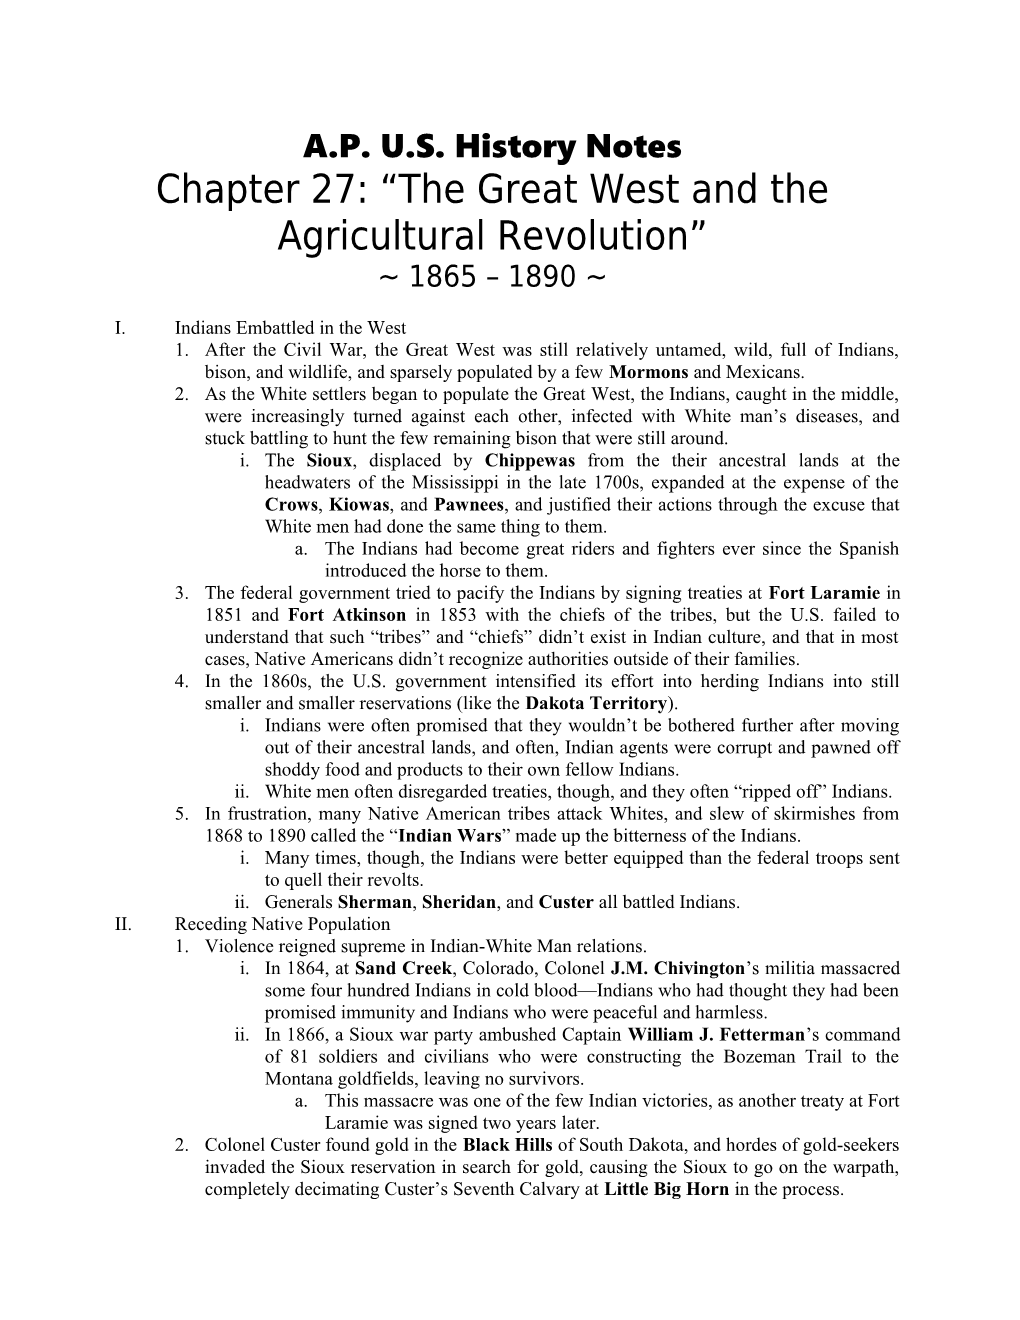 Chapter 27: the Great West and the Agricultural Revolution